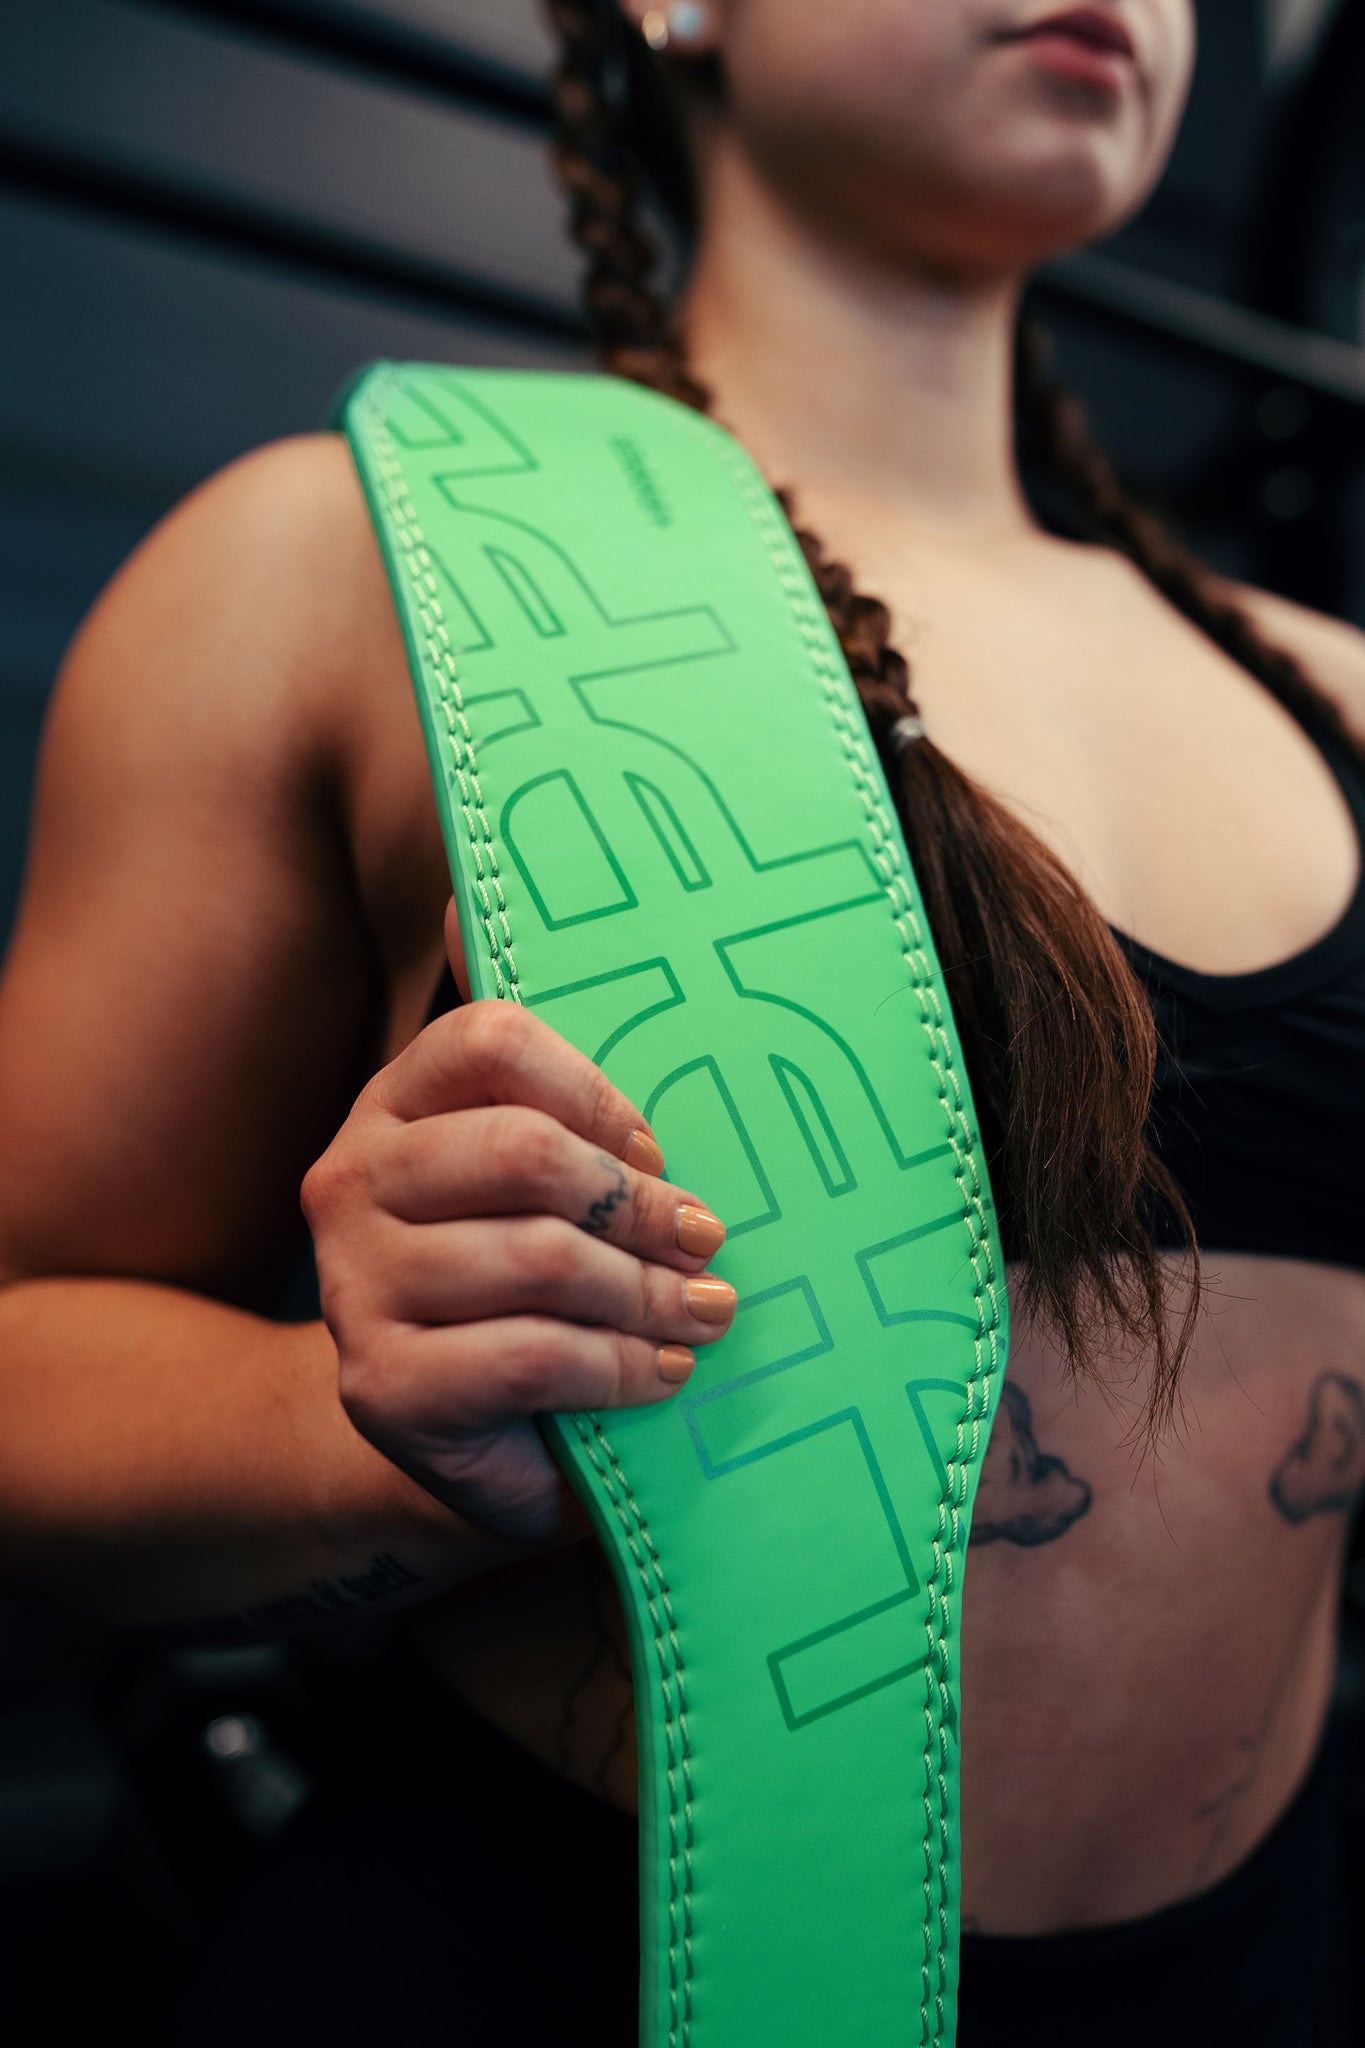 Should You Wear a Weightlifting Belt When You Lift?